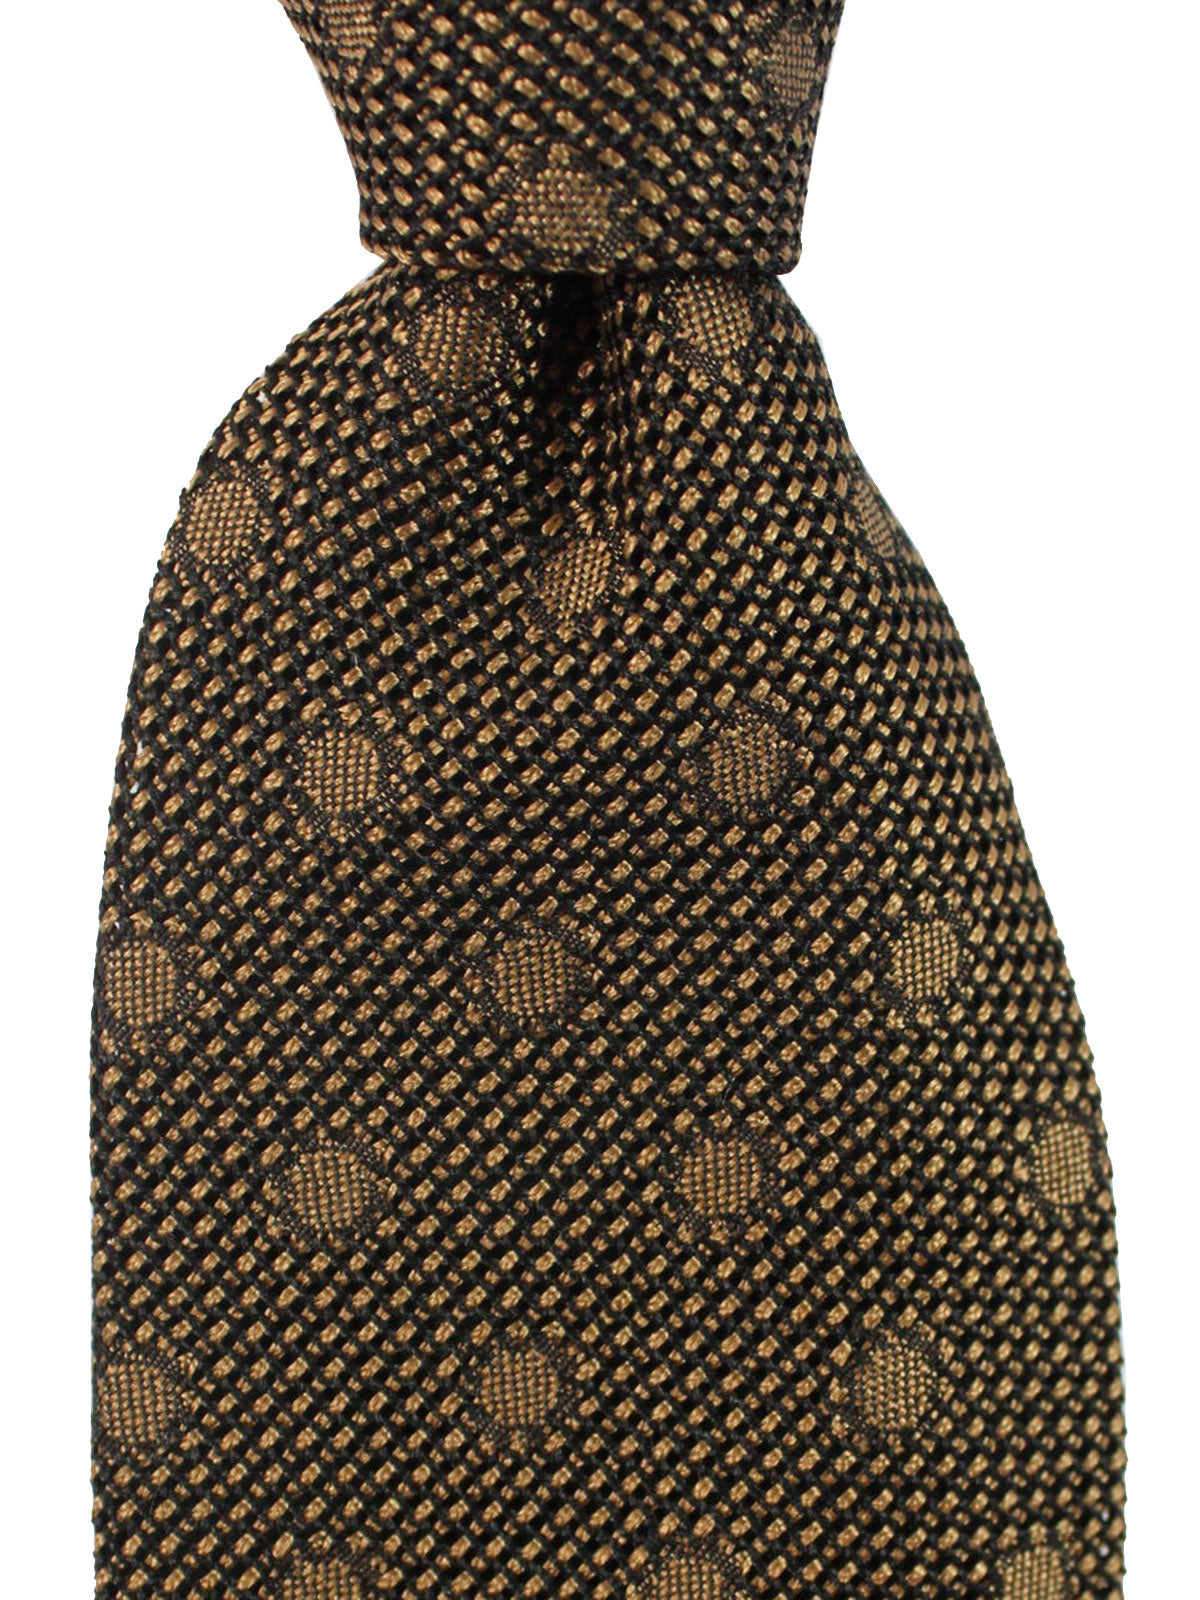 Tom Ford Tie Brown Black Polka Dots Hand Made In Italy